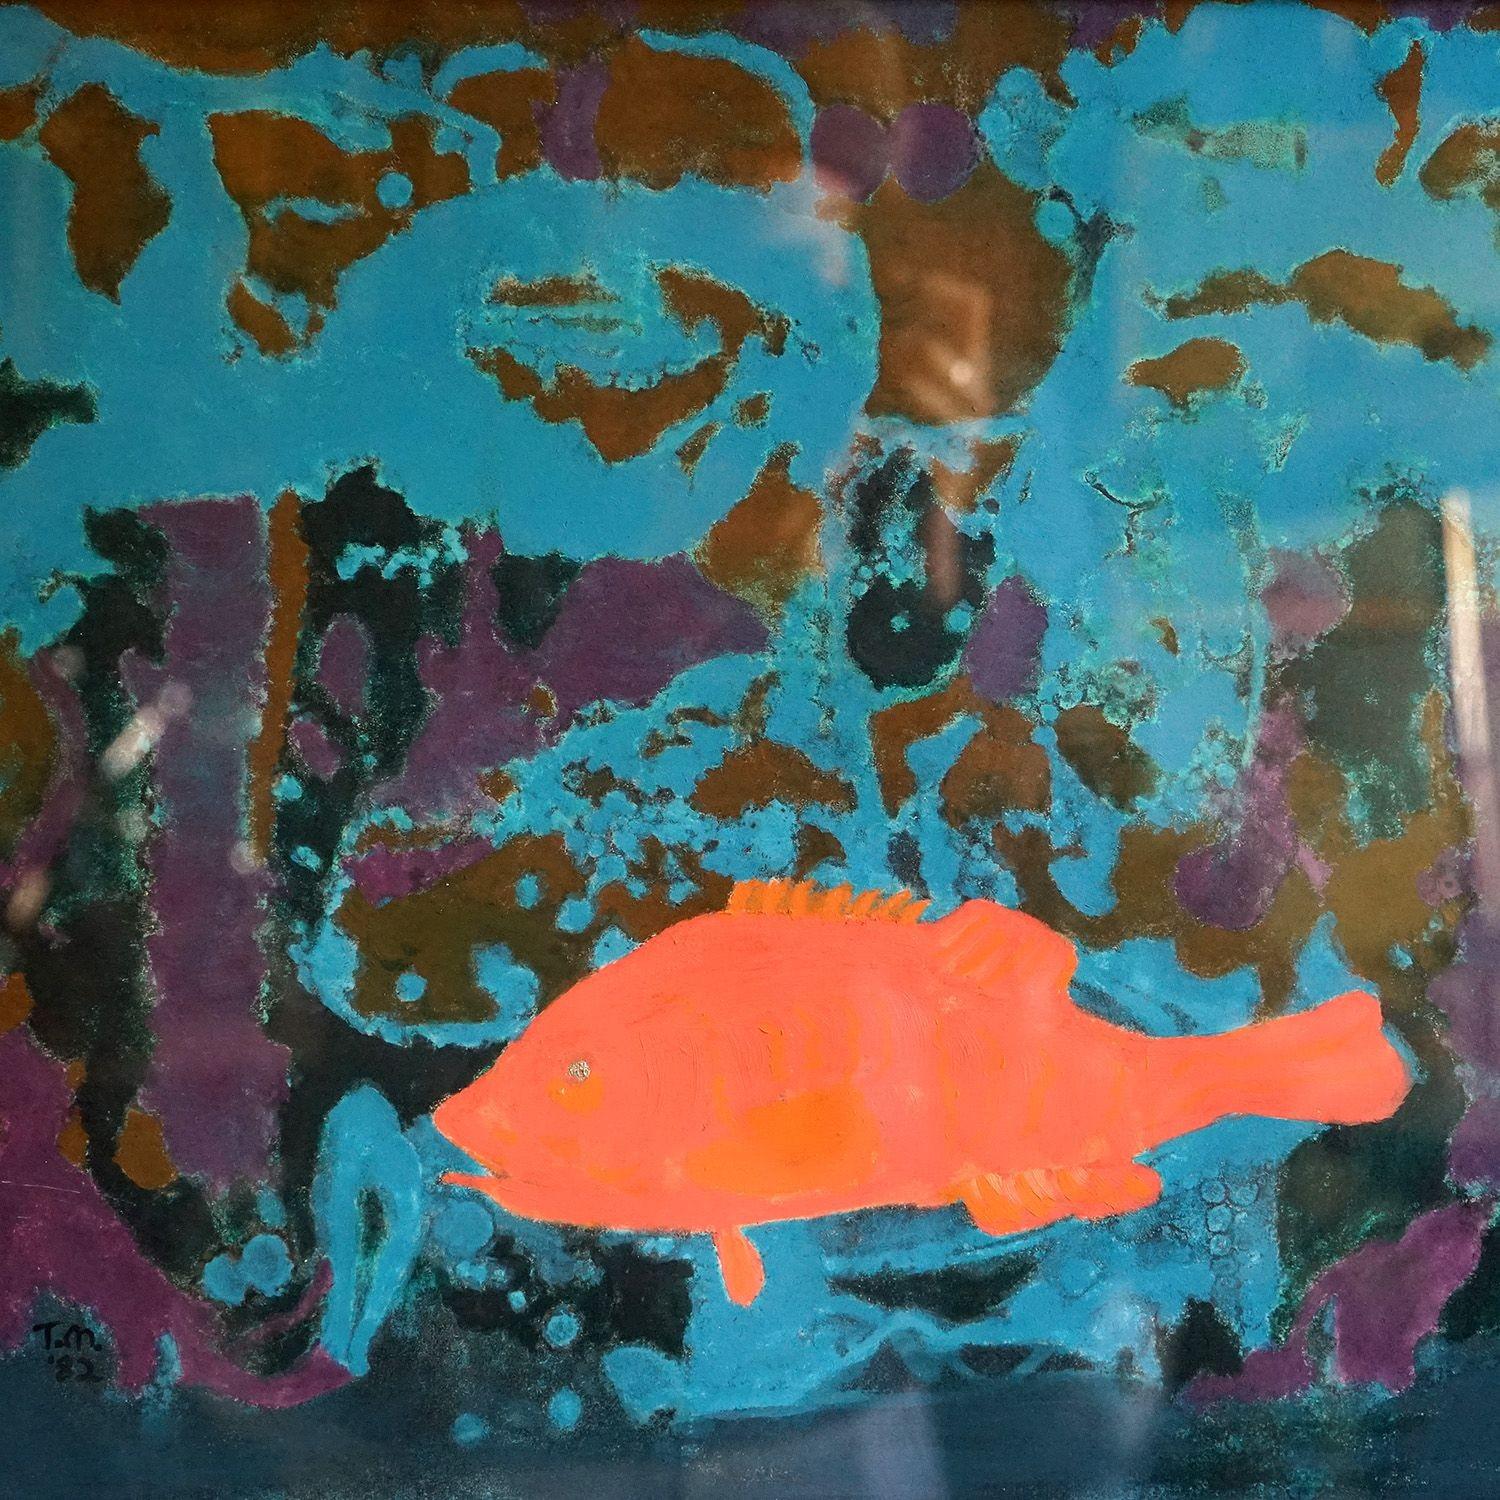 Painted Vintage Expressionist Underwater Scene With Fish 1980s Original Acrylic Painting For Sale